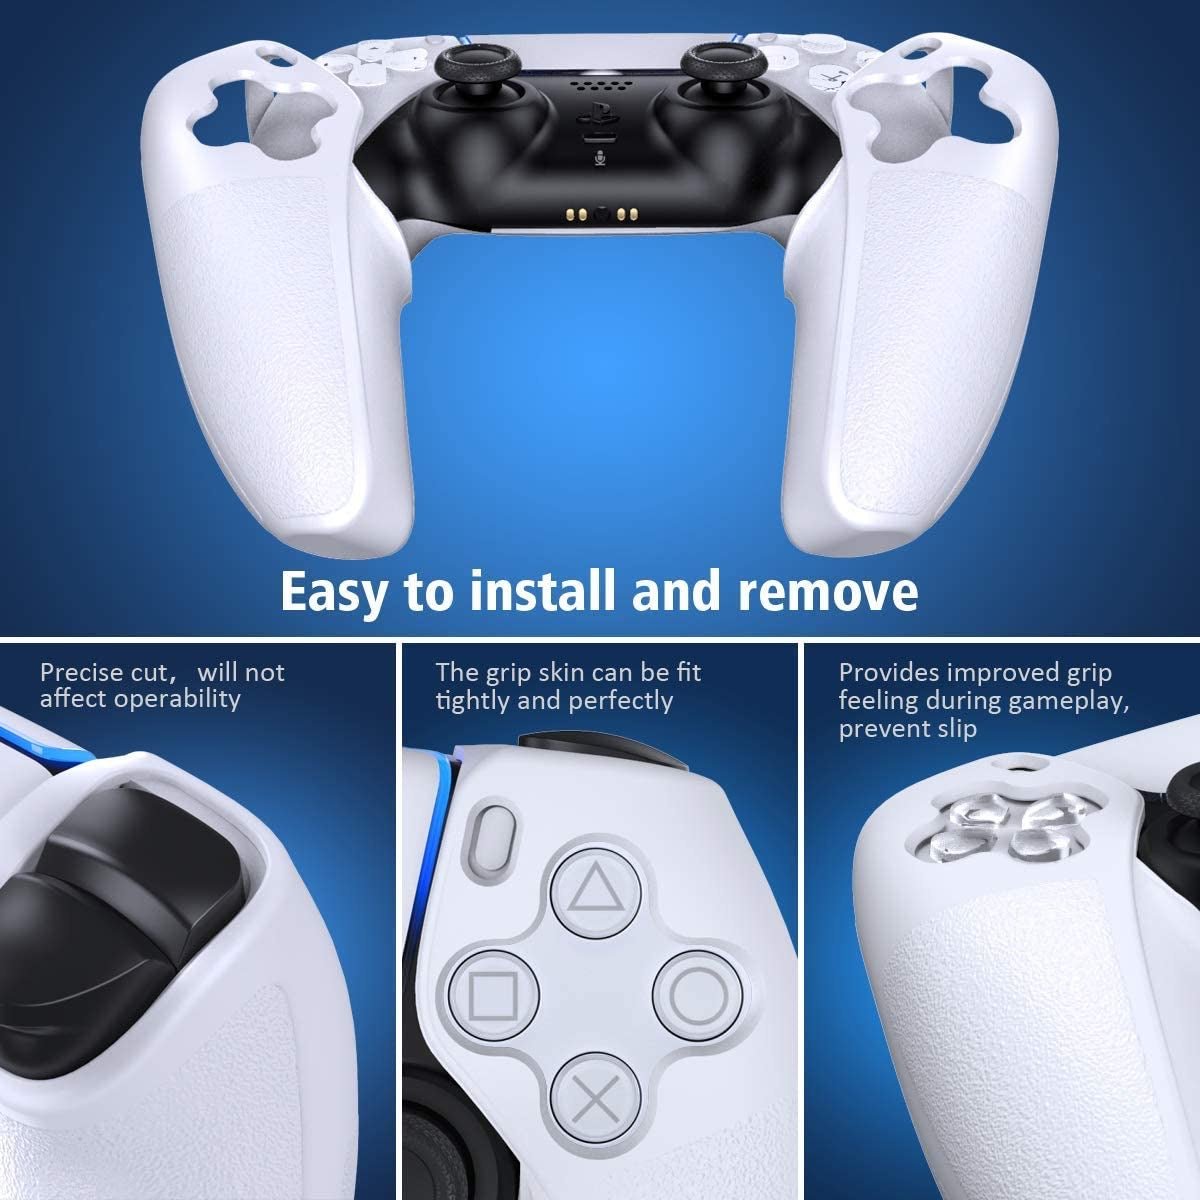 OIVO controller Grip Skin for PlayStation 5 - Black - Level UpOivo